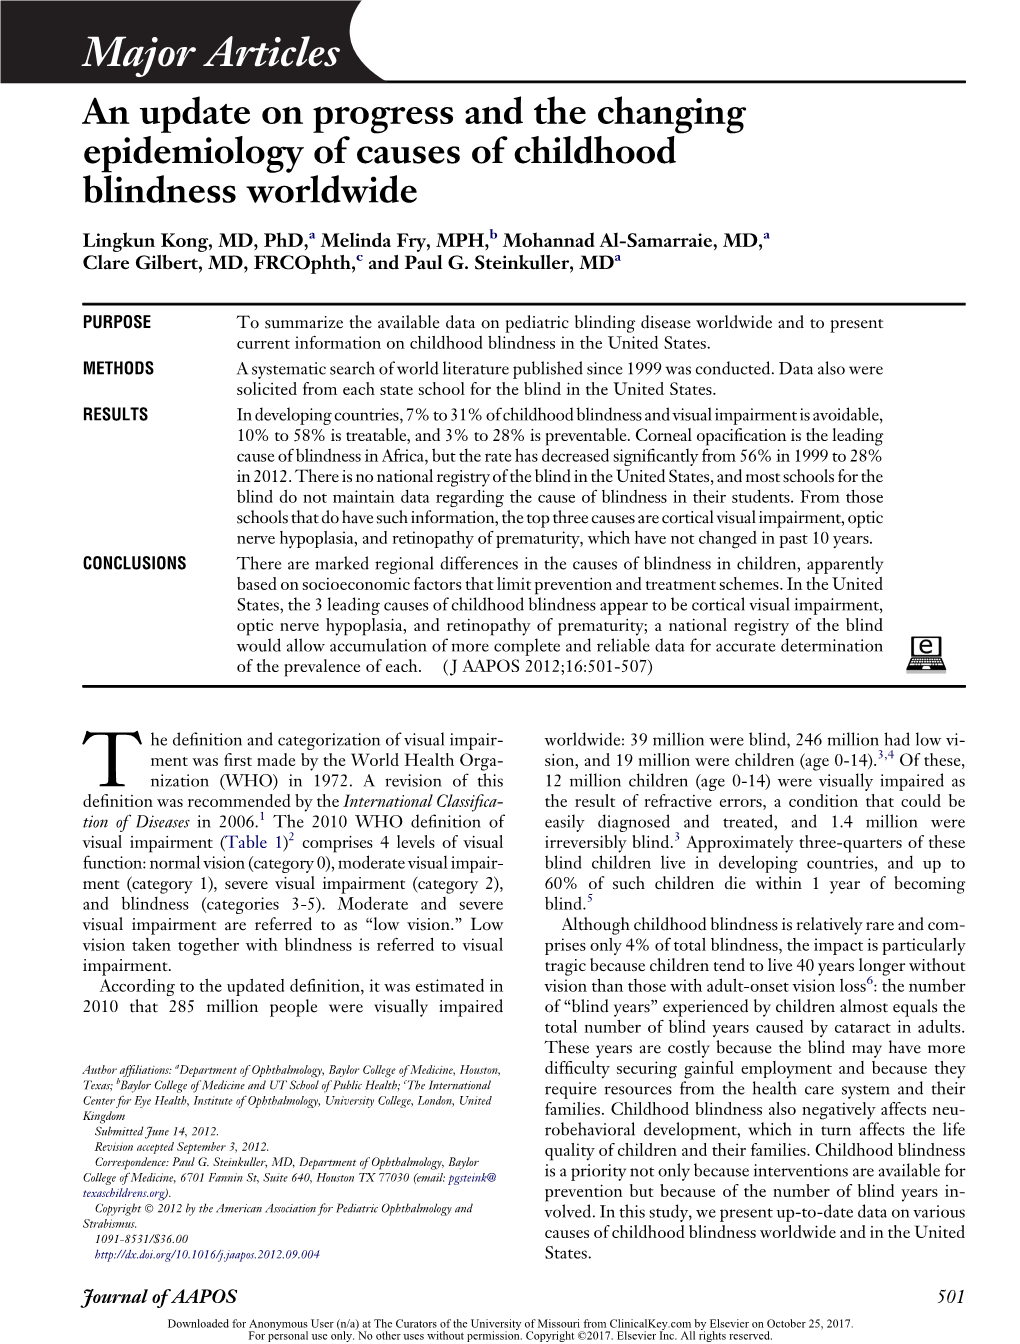 An Update on Progress and the Changing Epidemiology of Causes of Childhood Blindness Worldwide